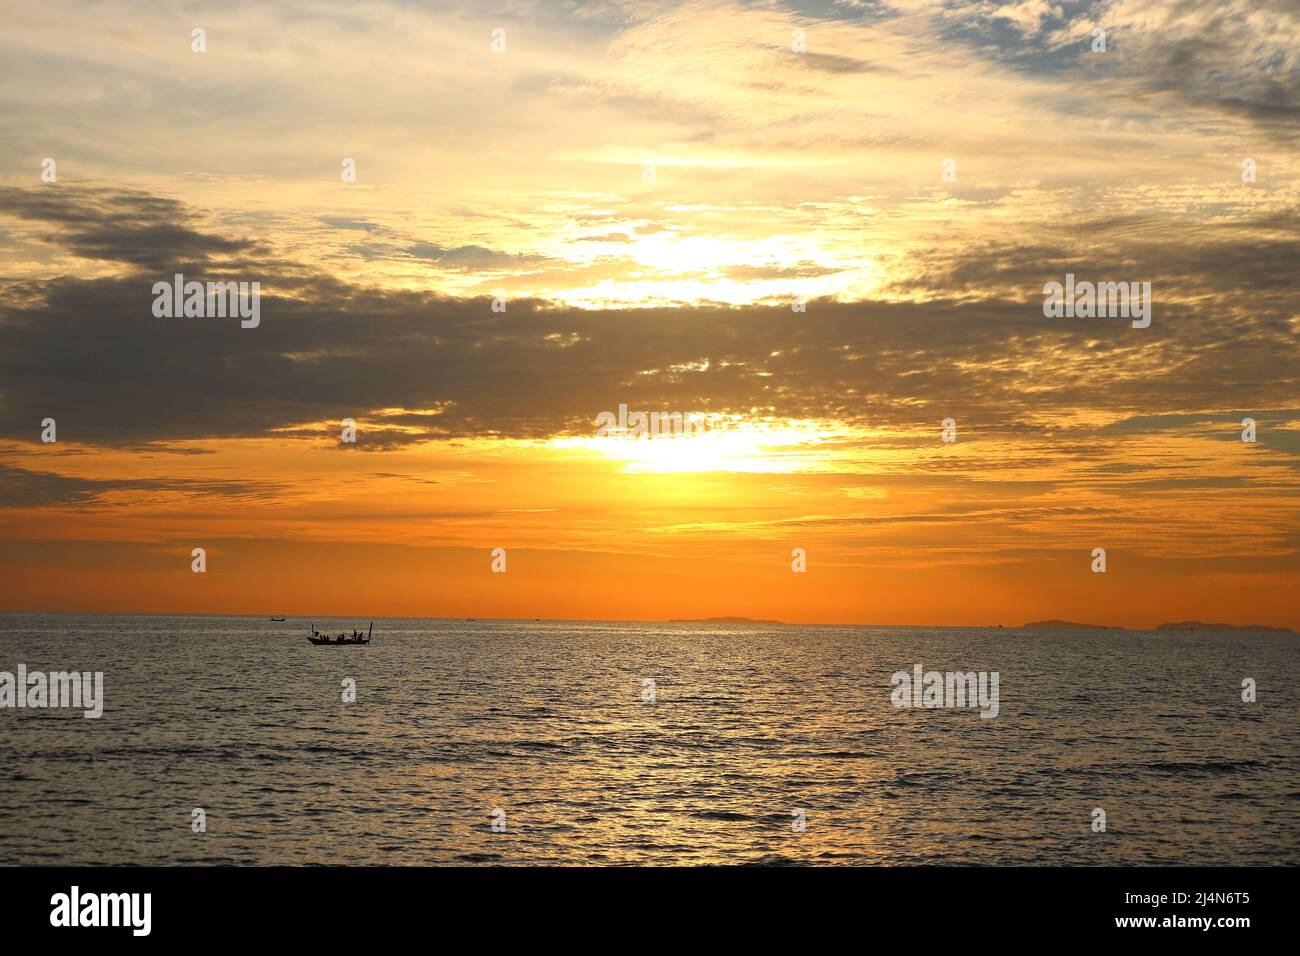 landscape view of peaceful ocean with beautiful sunset background Stock Photo